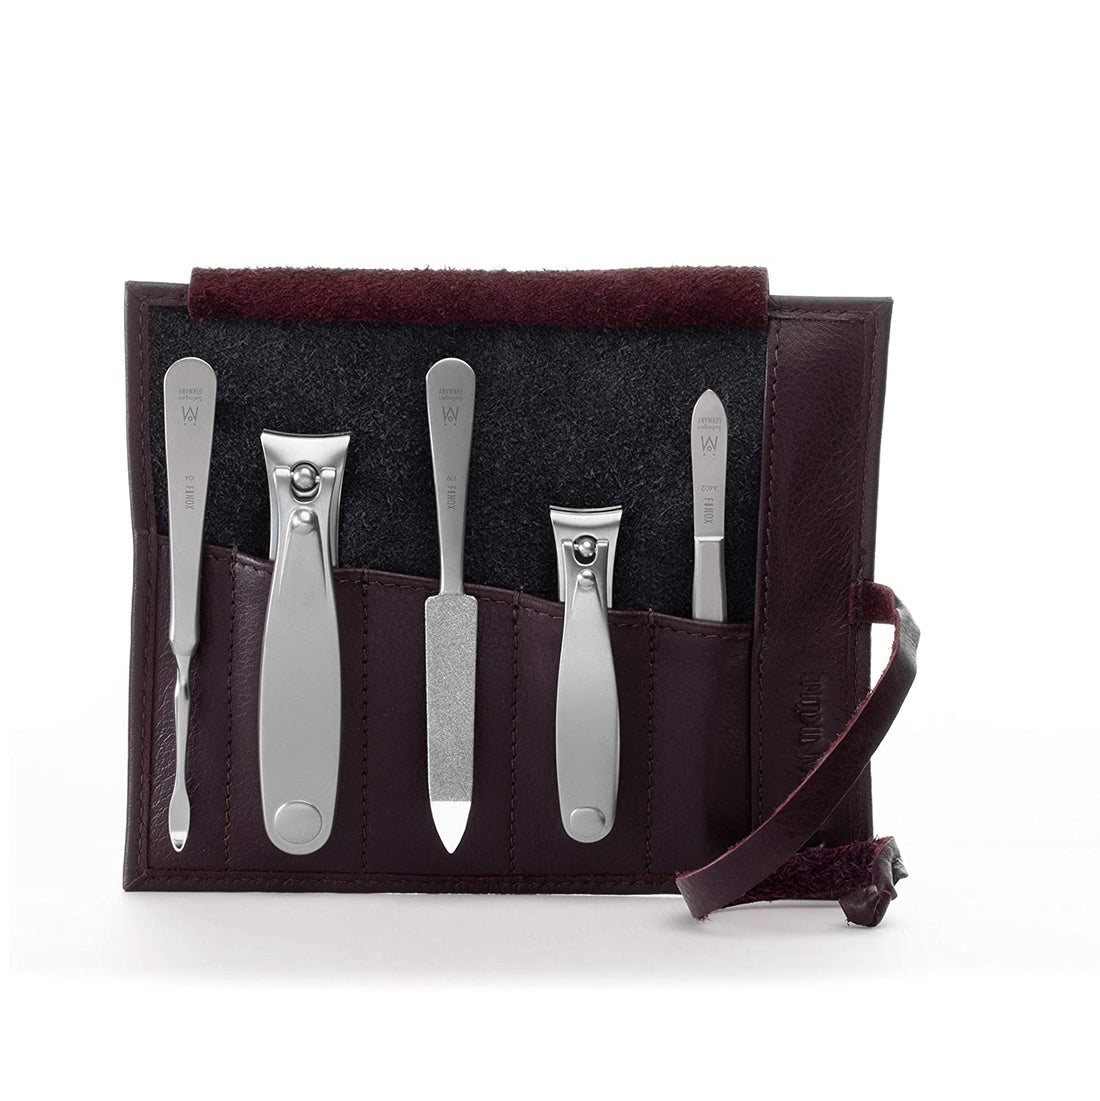 5pc Manicure & Pedicure Set in Leather Roll